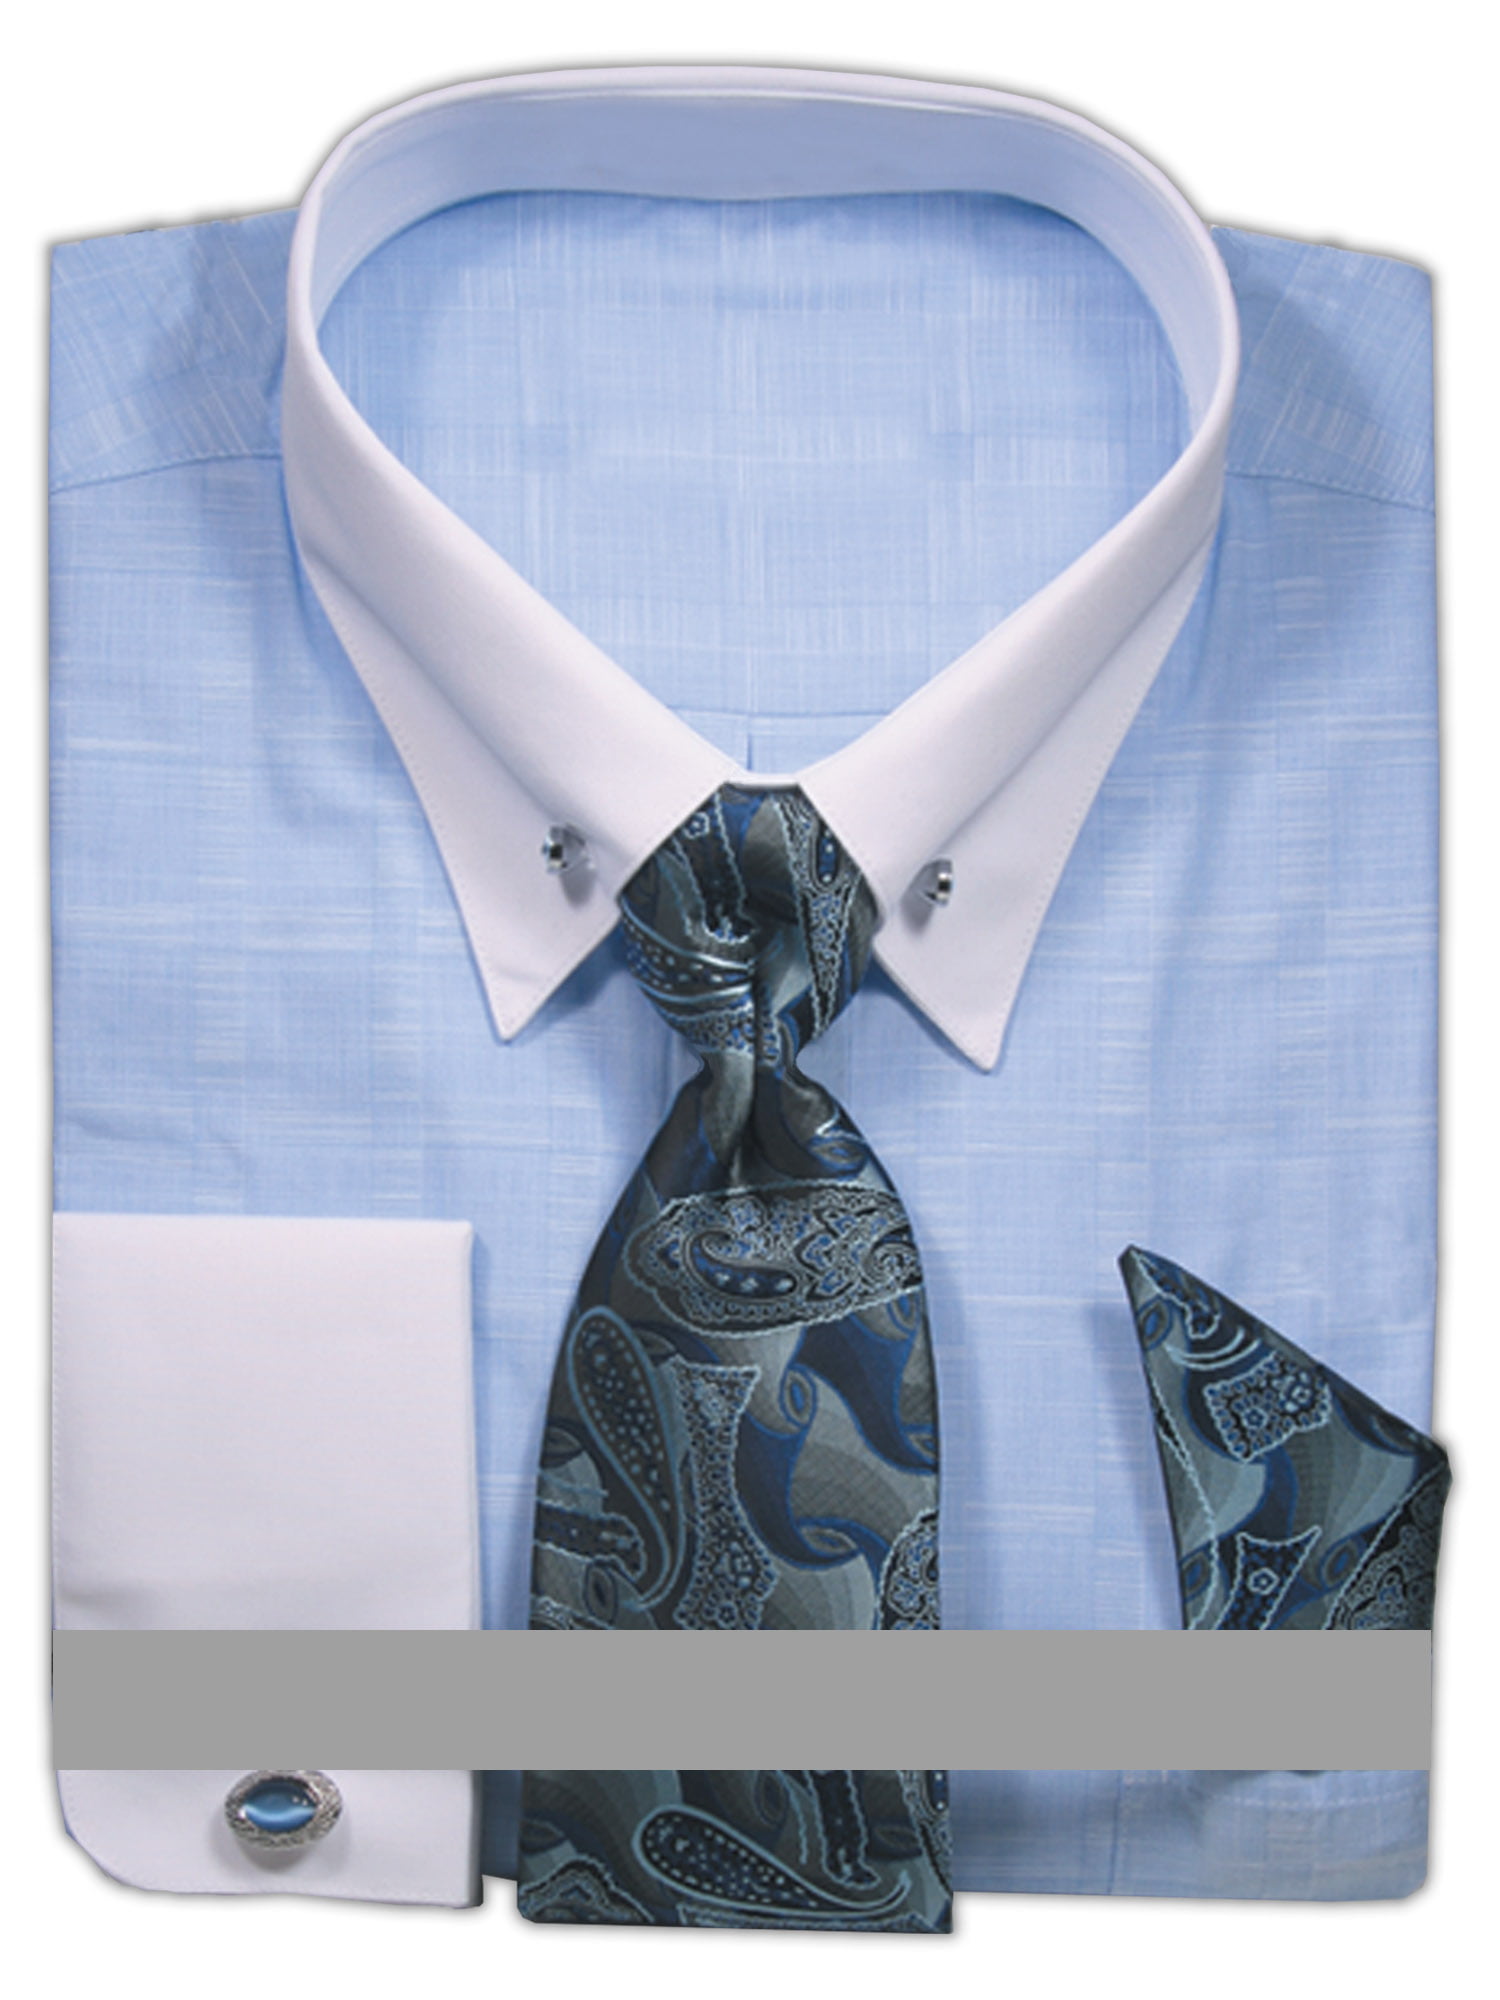 Sunrise Outlet - Men's French Cuff Jacquard Dress Shirt with Collar Bar ...